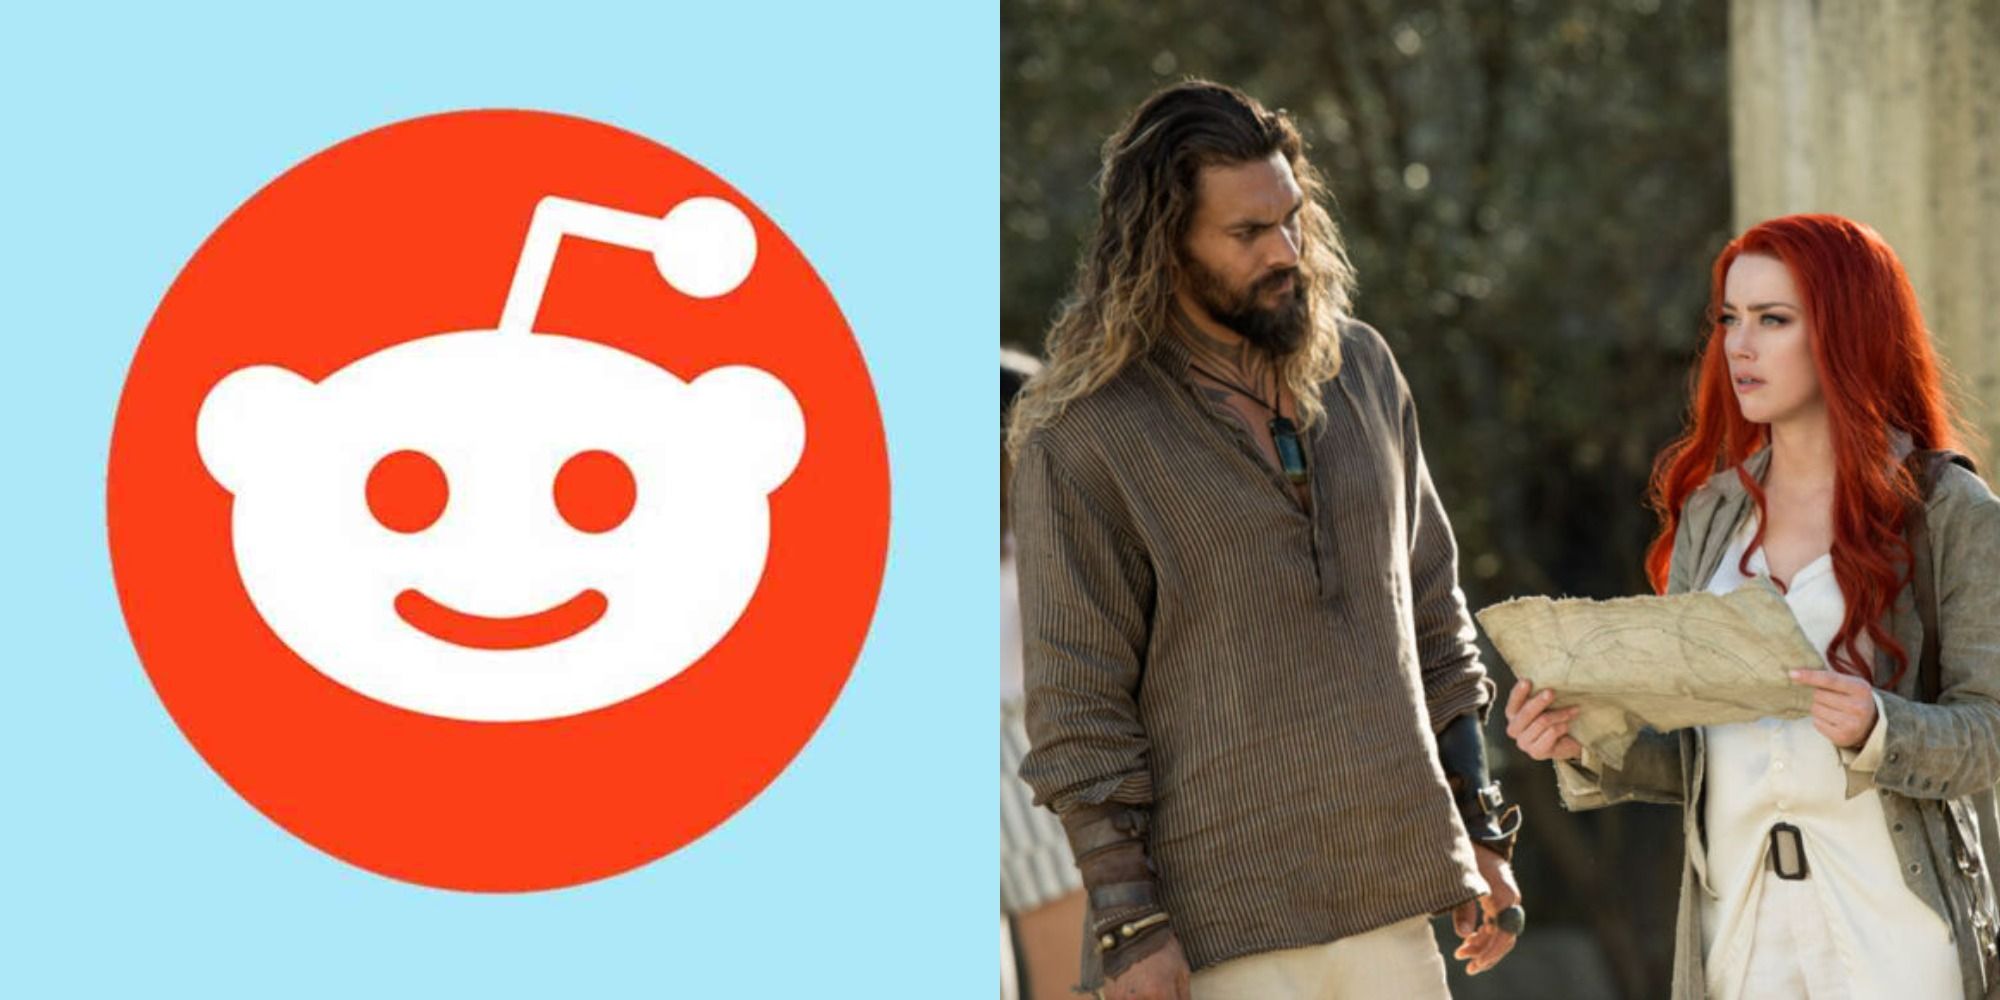 Split image showing the Reddit logo and Aquaman and Meera